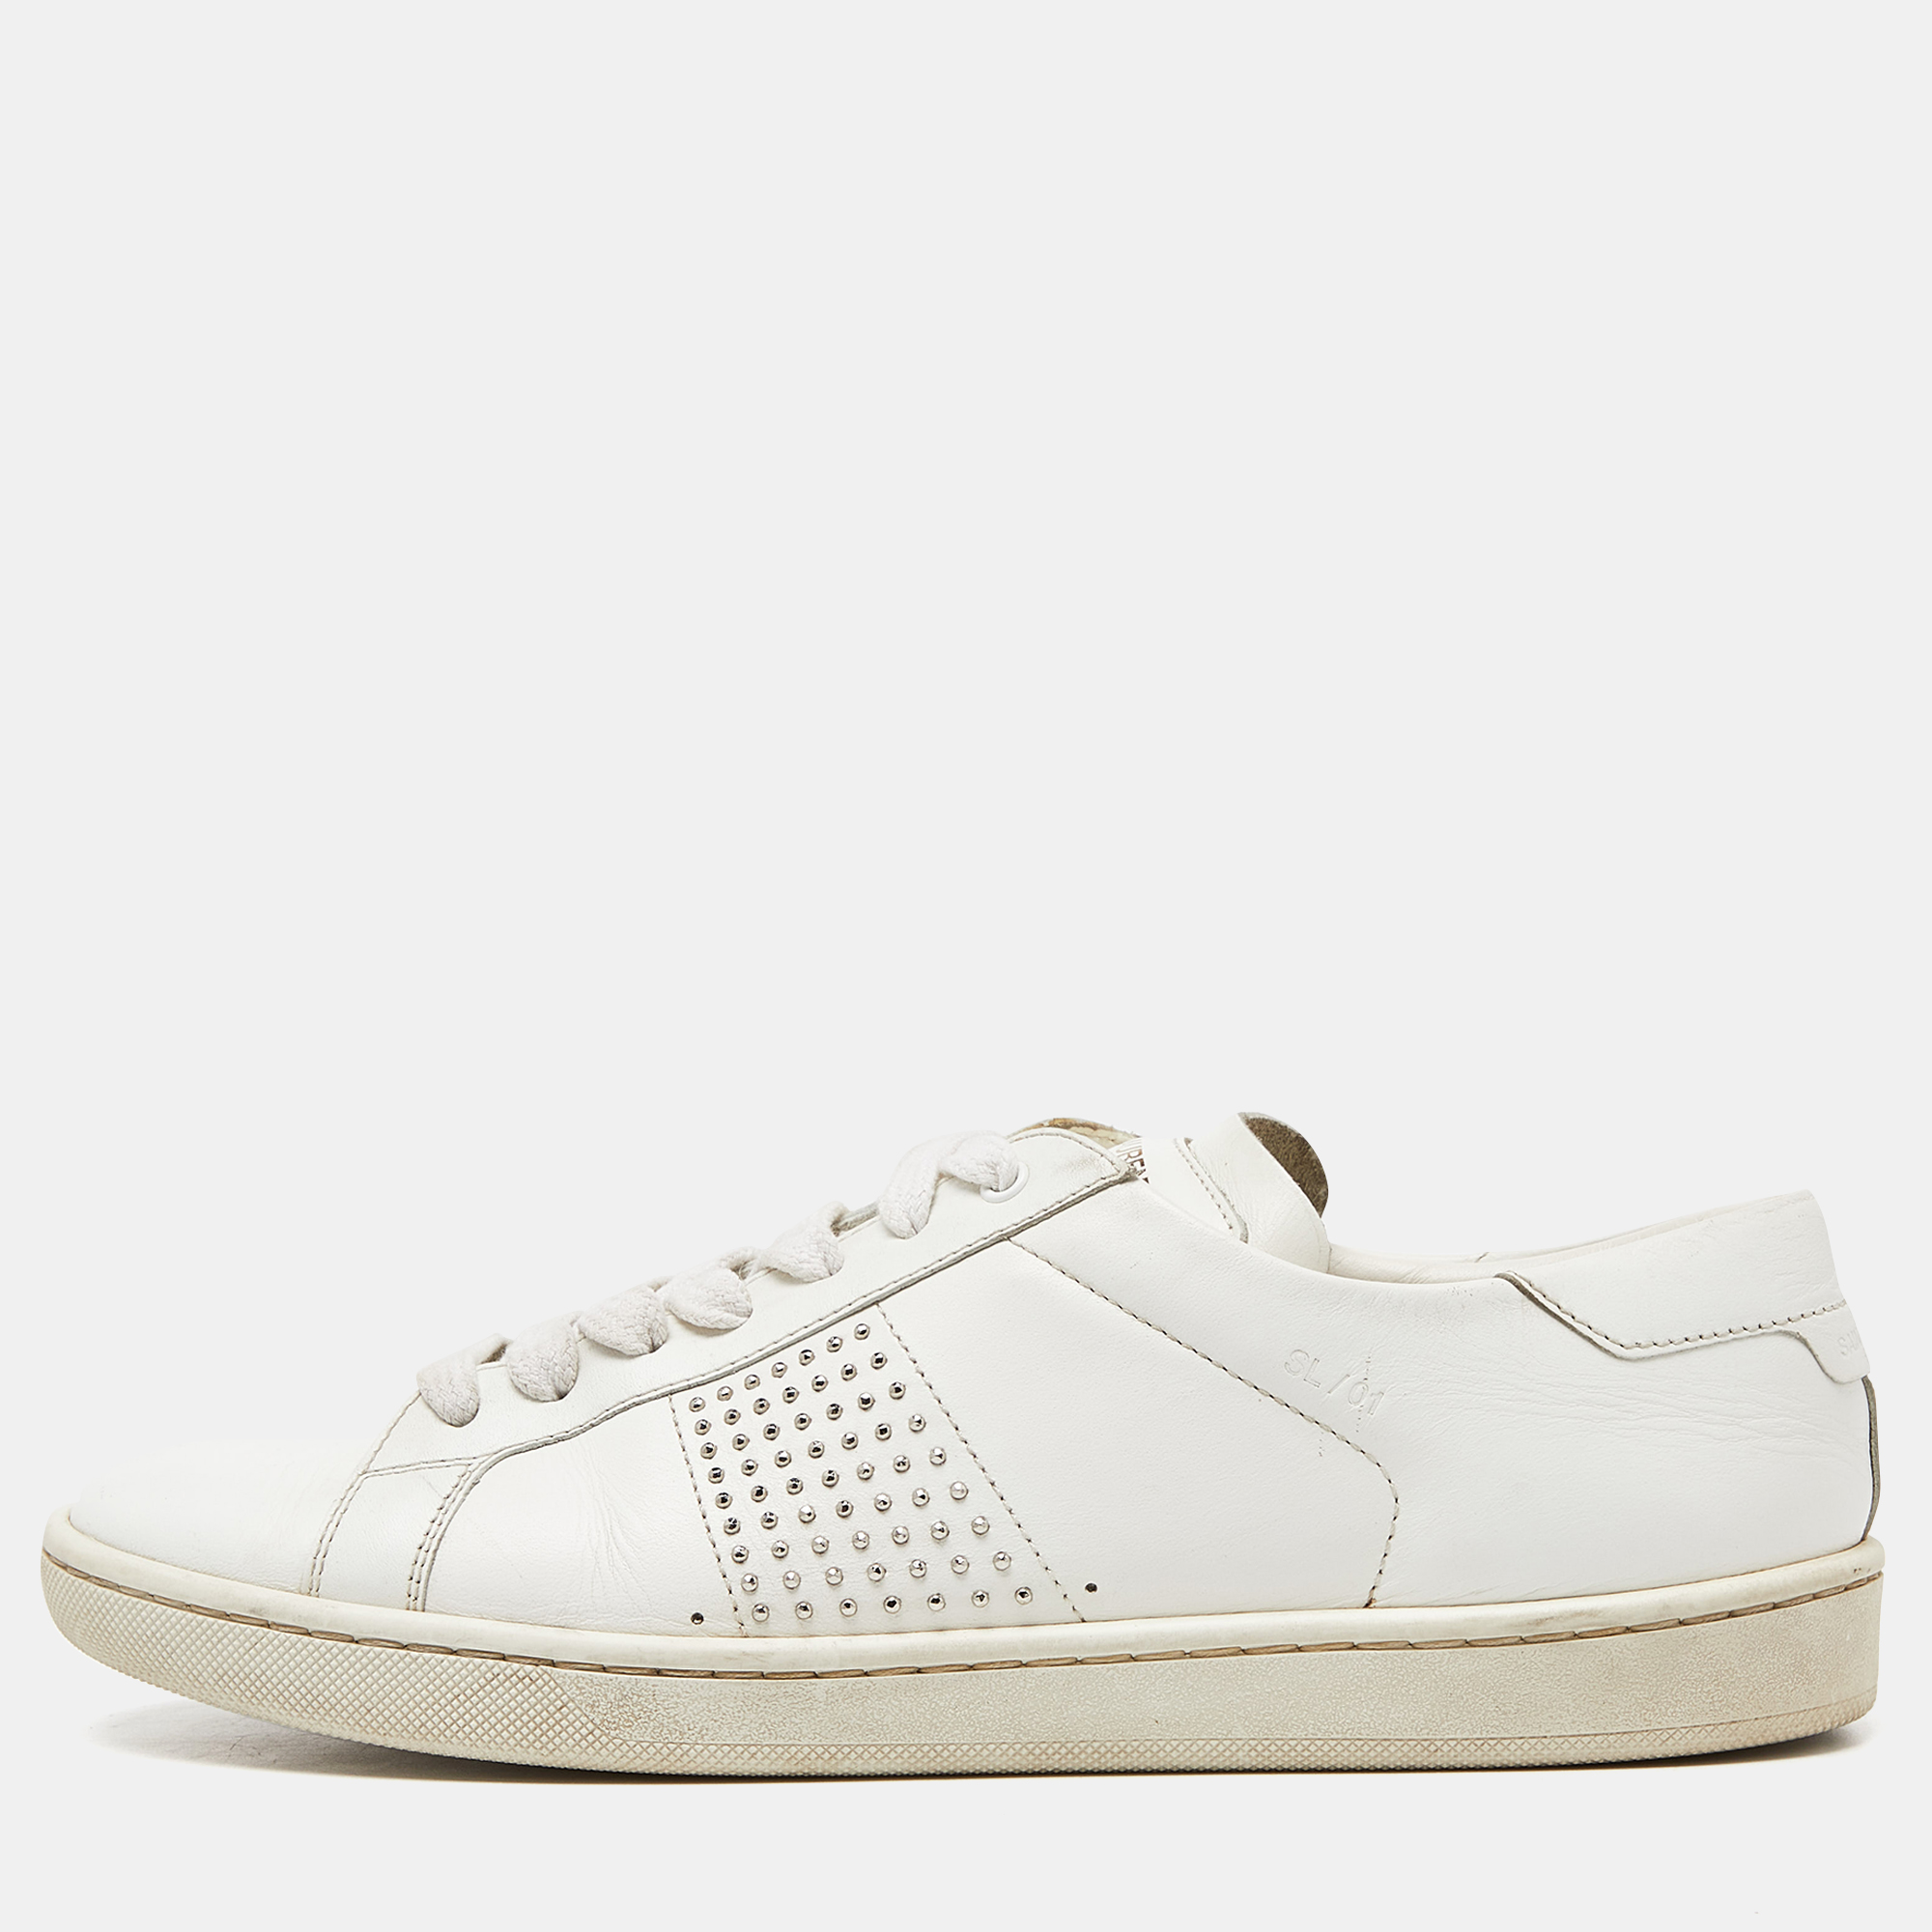 Pre-owned Saint Laurent White Leather Crystal Embellished Low Top Sneakers Size 38.5